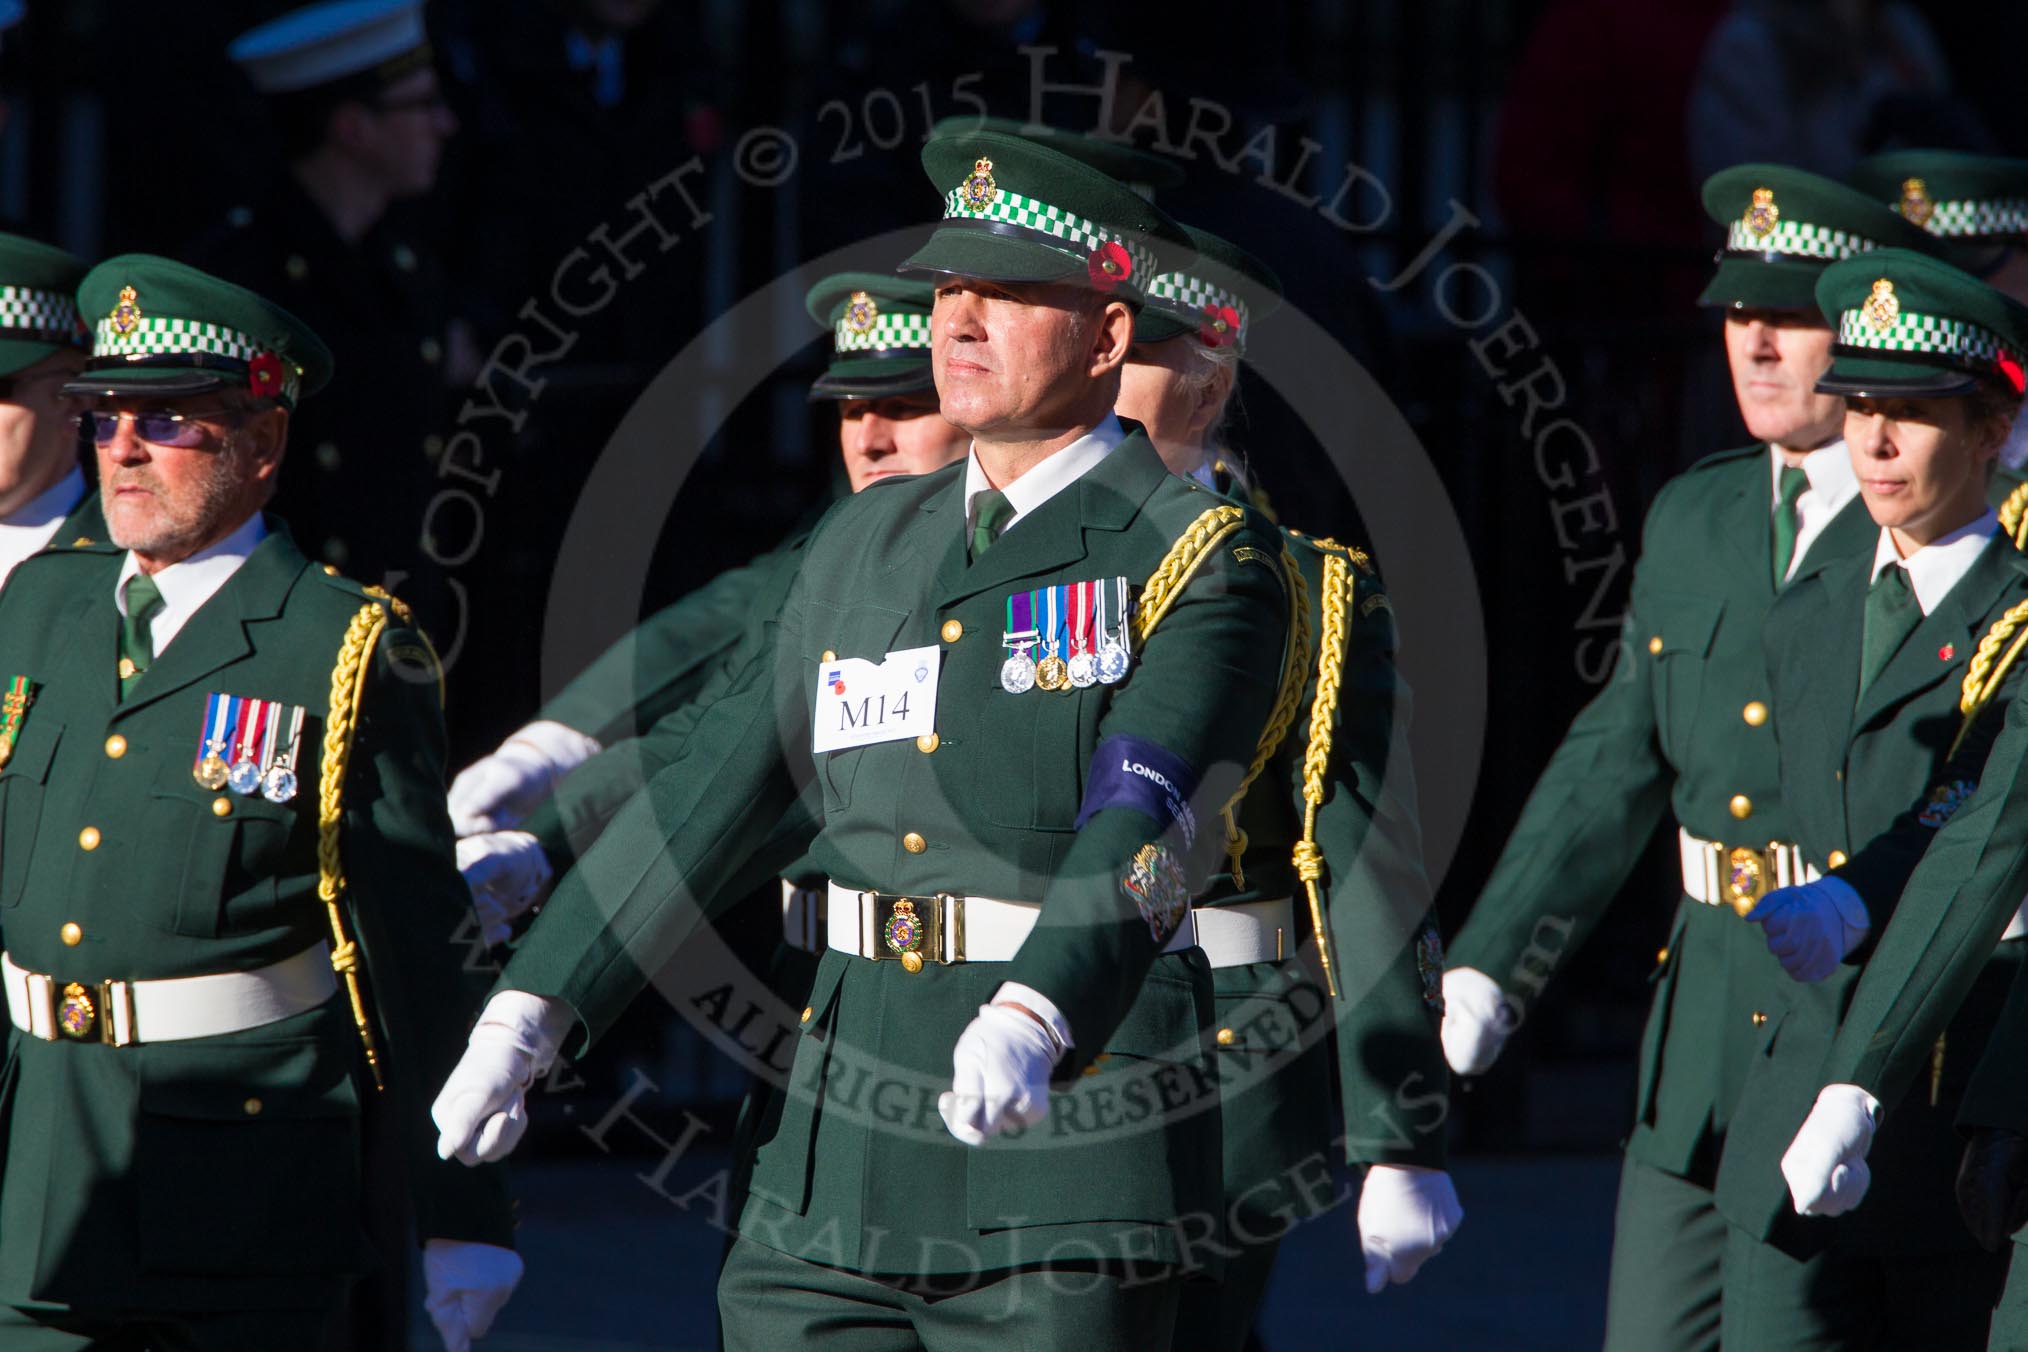 Remembrance Sunday Cenotaph March Past 2013: M14 - London Ambulance Service NHS Trust..
Press stand opposite the Foreign Office building, Whitehall, London SW1,
London,
Greater London,
United Kingdom,
on 10 November 2013 at 12:10, image #1979